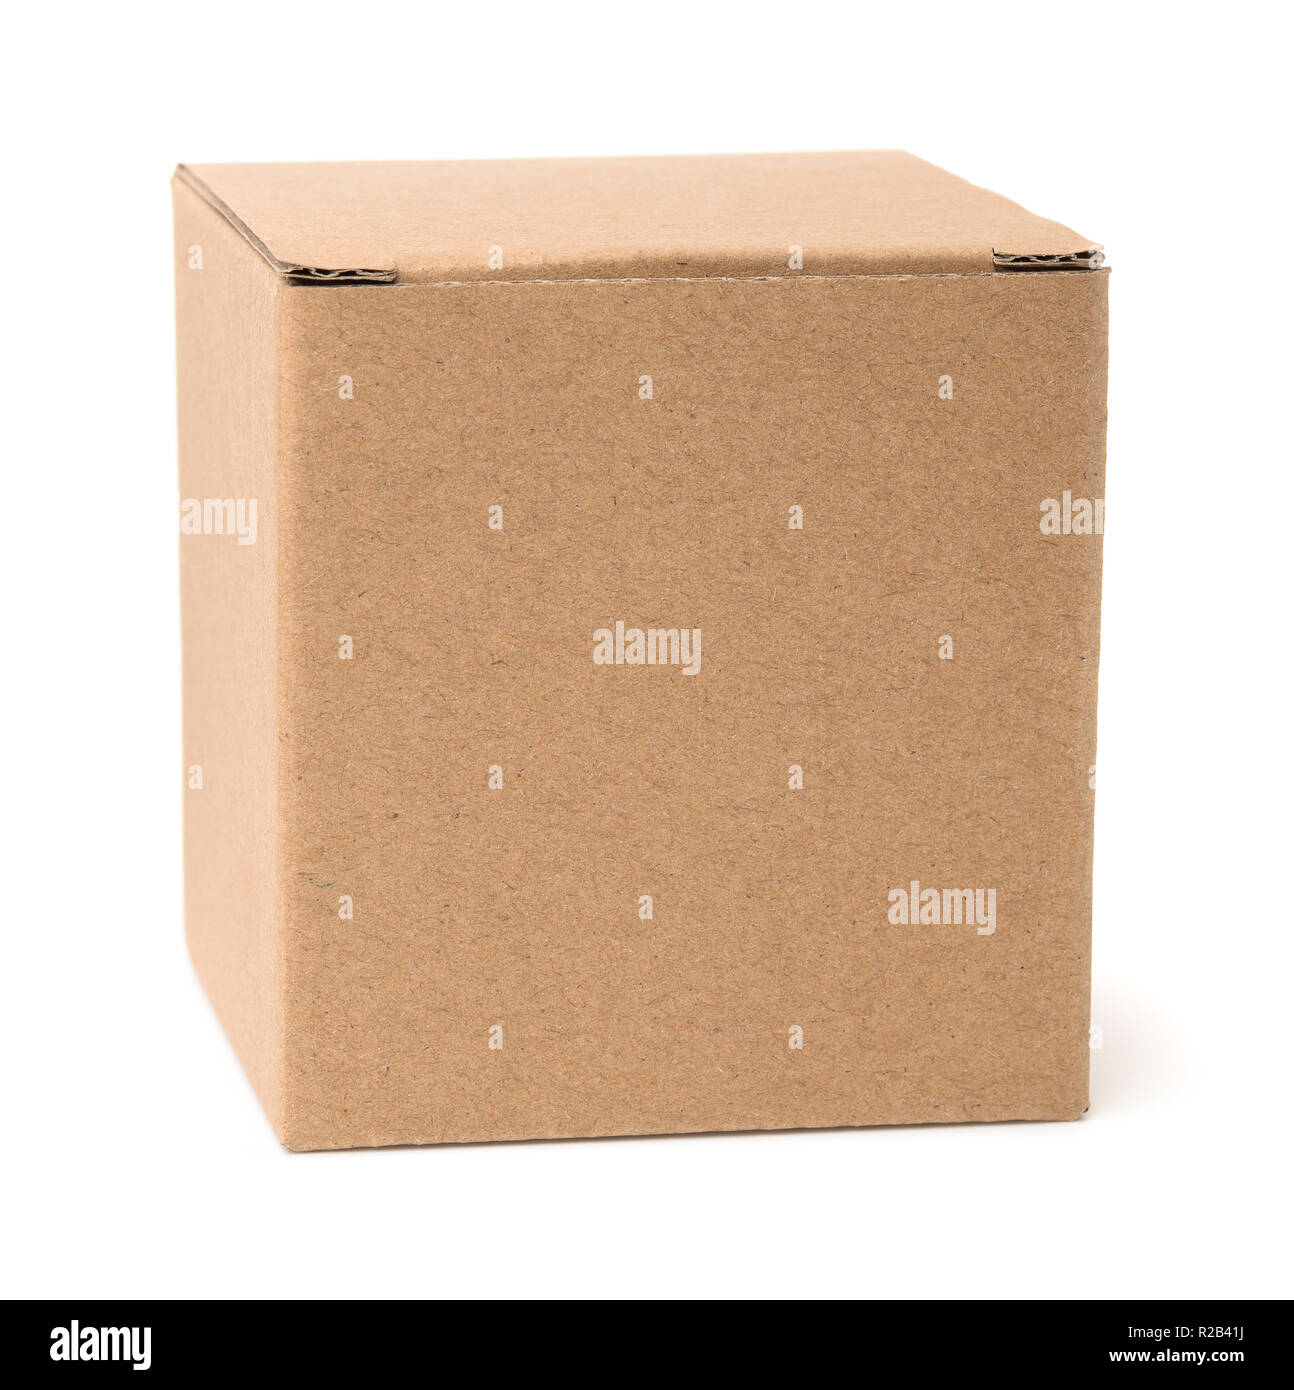 Download Front View Closed Cardboard Box High Resolution Stock Photography And Images Alamy